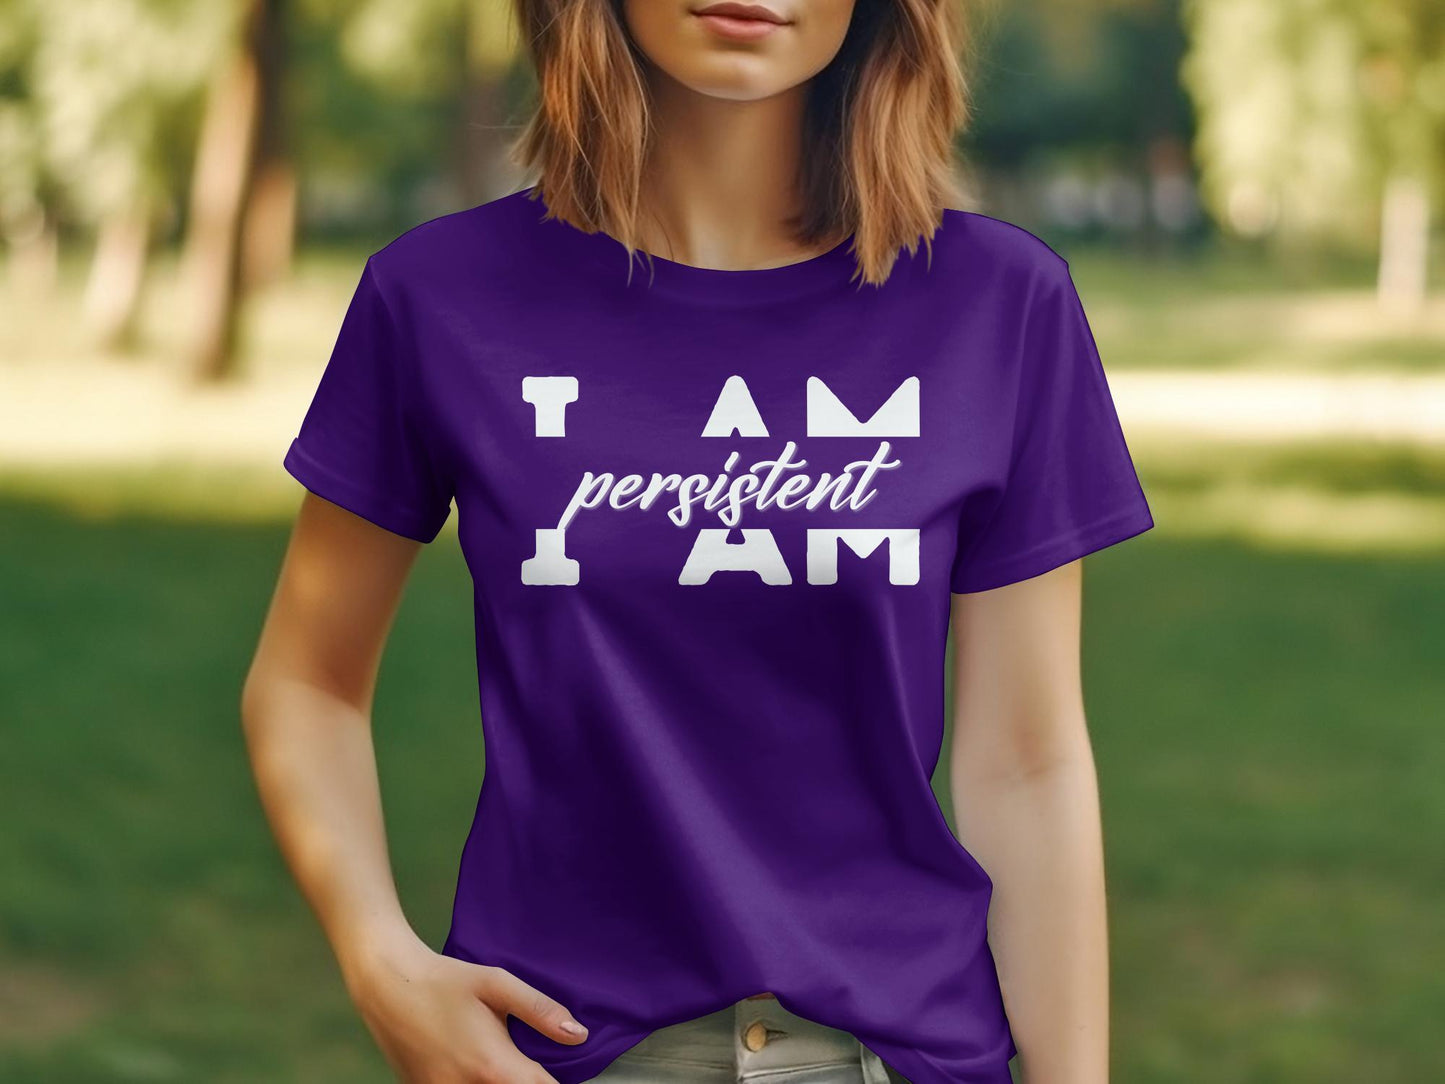 I Am Persistent - An encouraging and motivating Affirmation Quote T-shirt.